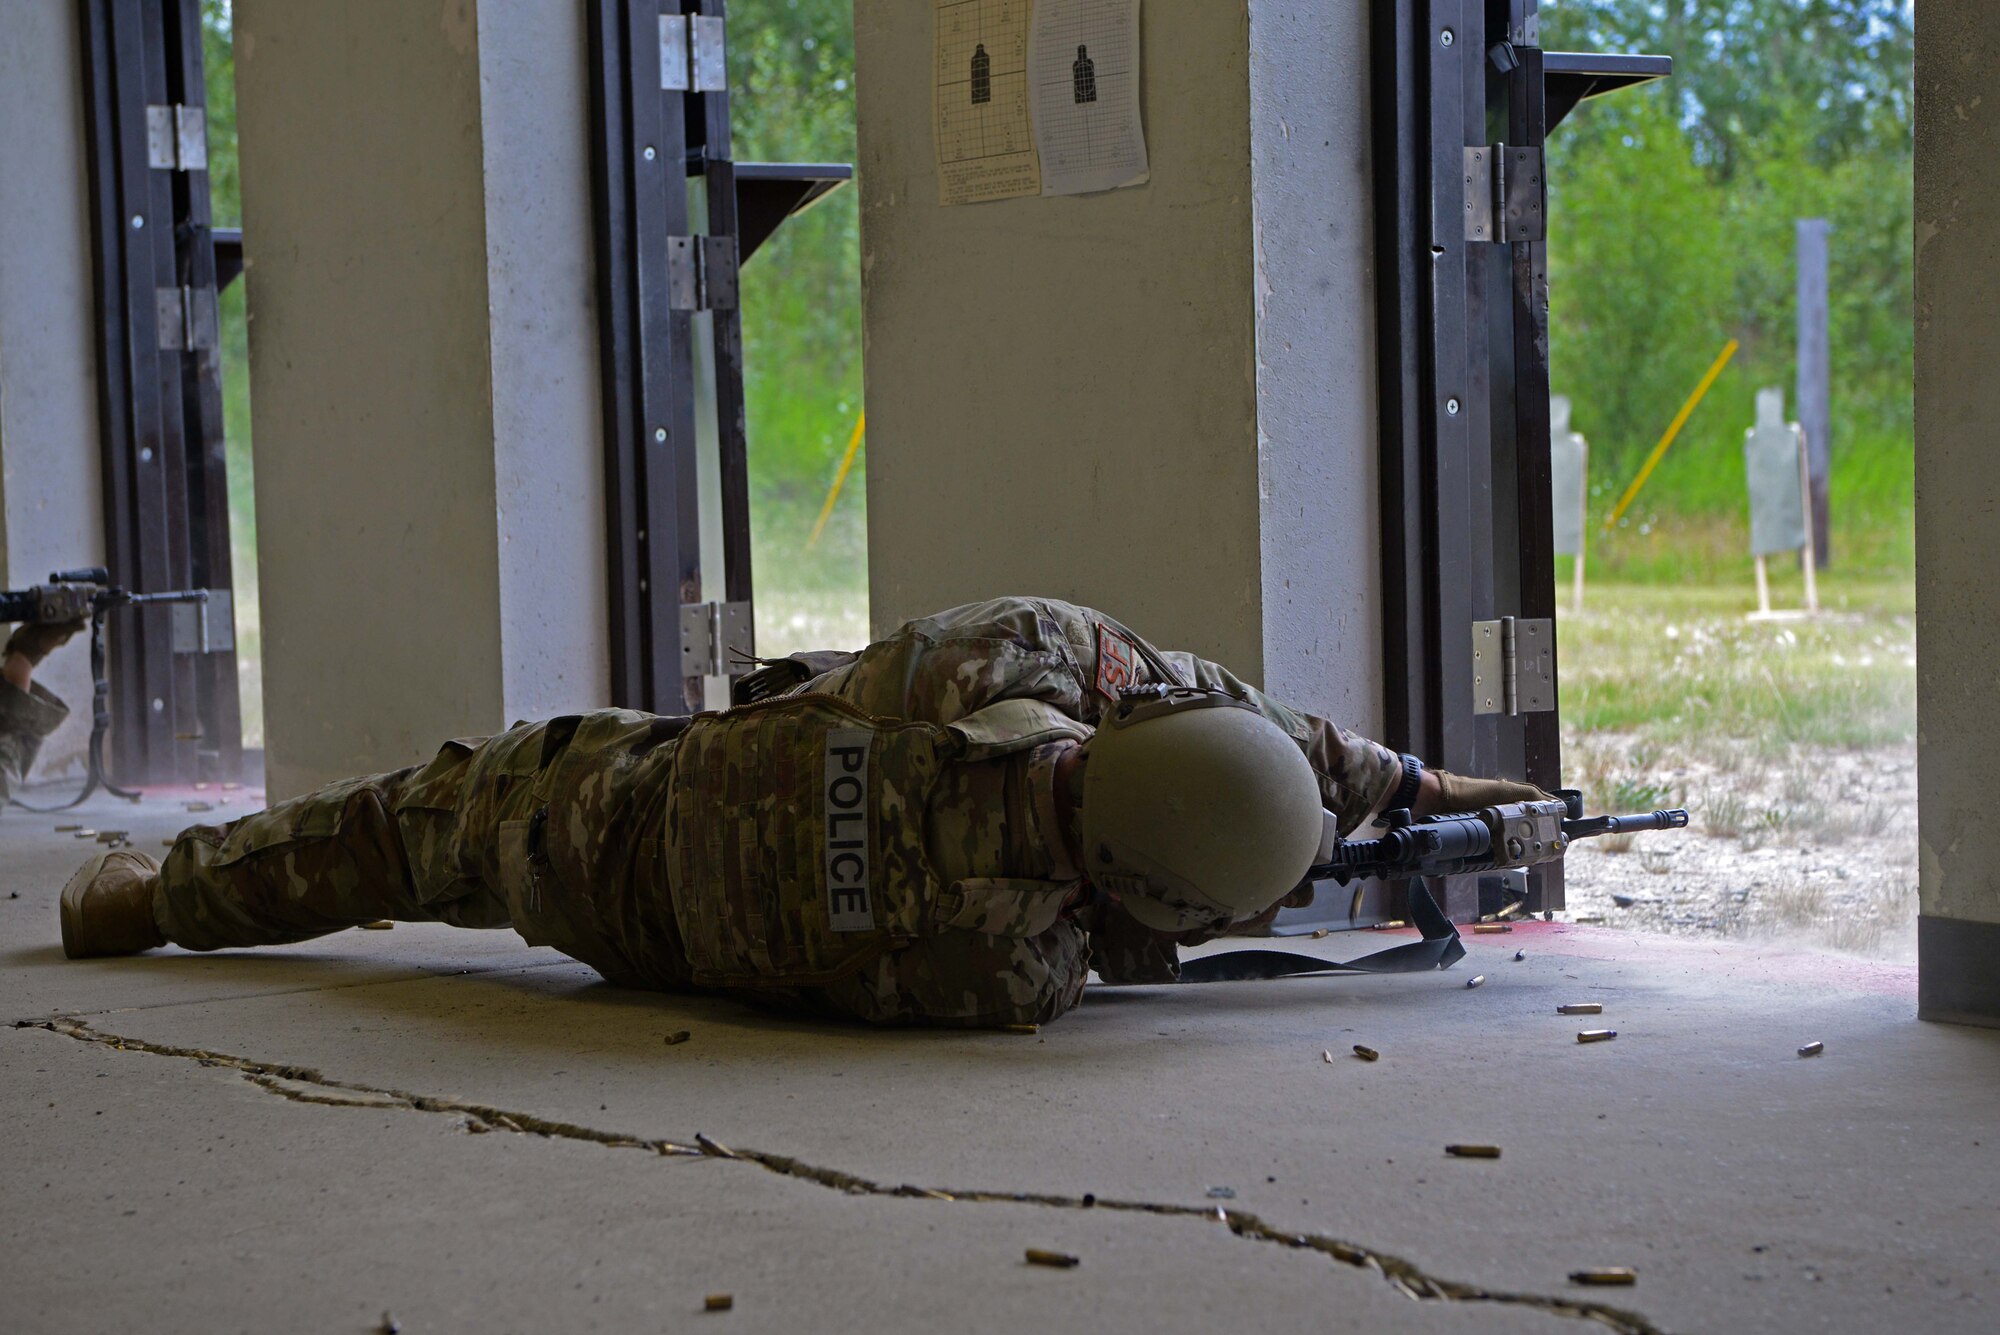 An Airman assigned to the 354th Security Forces Squadron fires an M4 carbine in a new firing position during a new Security Forces Qualification Course on Eielson Air Force Base, Alaska, July 14, 2021. In this proposed course, Defenders will fire from many different positions to simulate firing during an active shooter situation. (U.S. Air Force photo by Senior Airman Beaux Hebert)